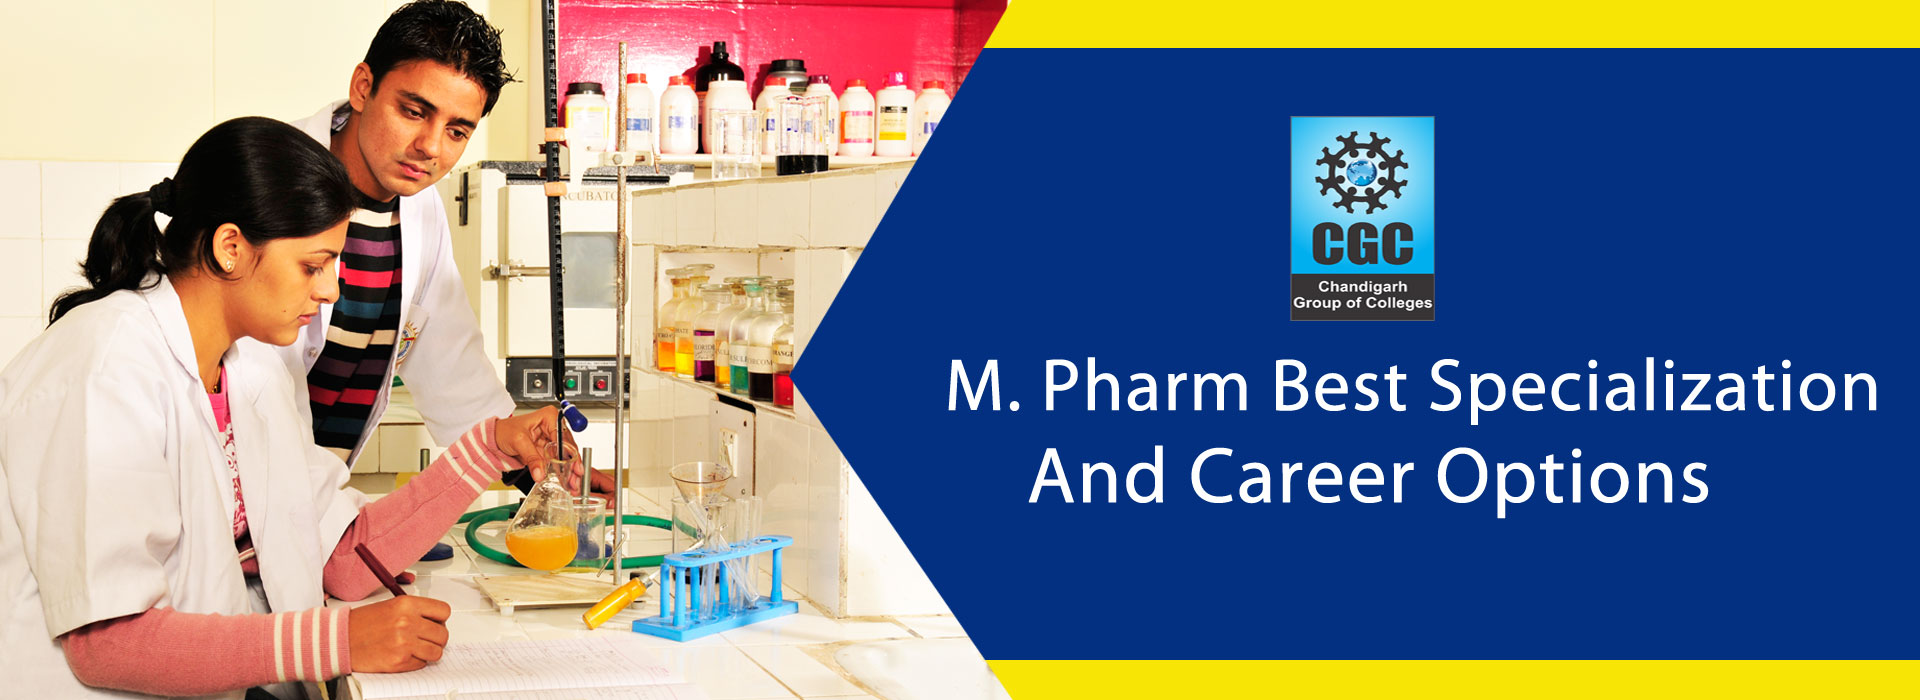 M. Pharm Best Specialization and Career Options 